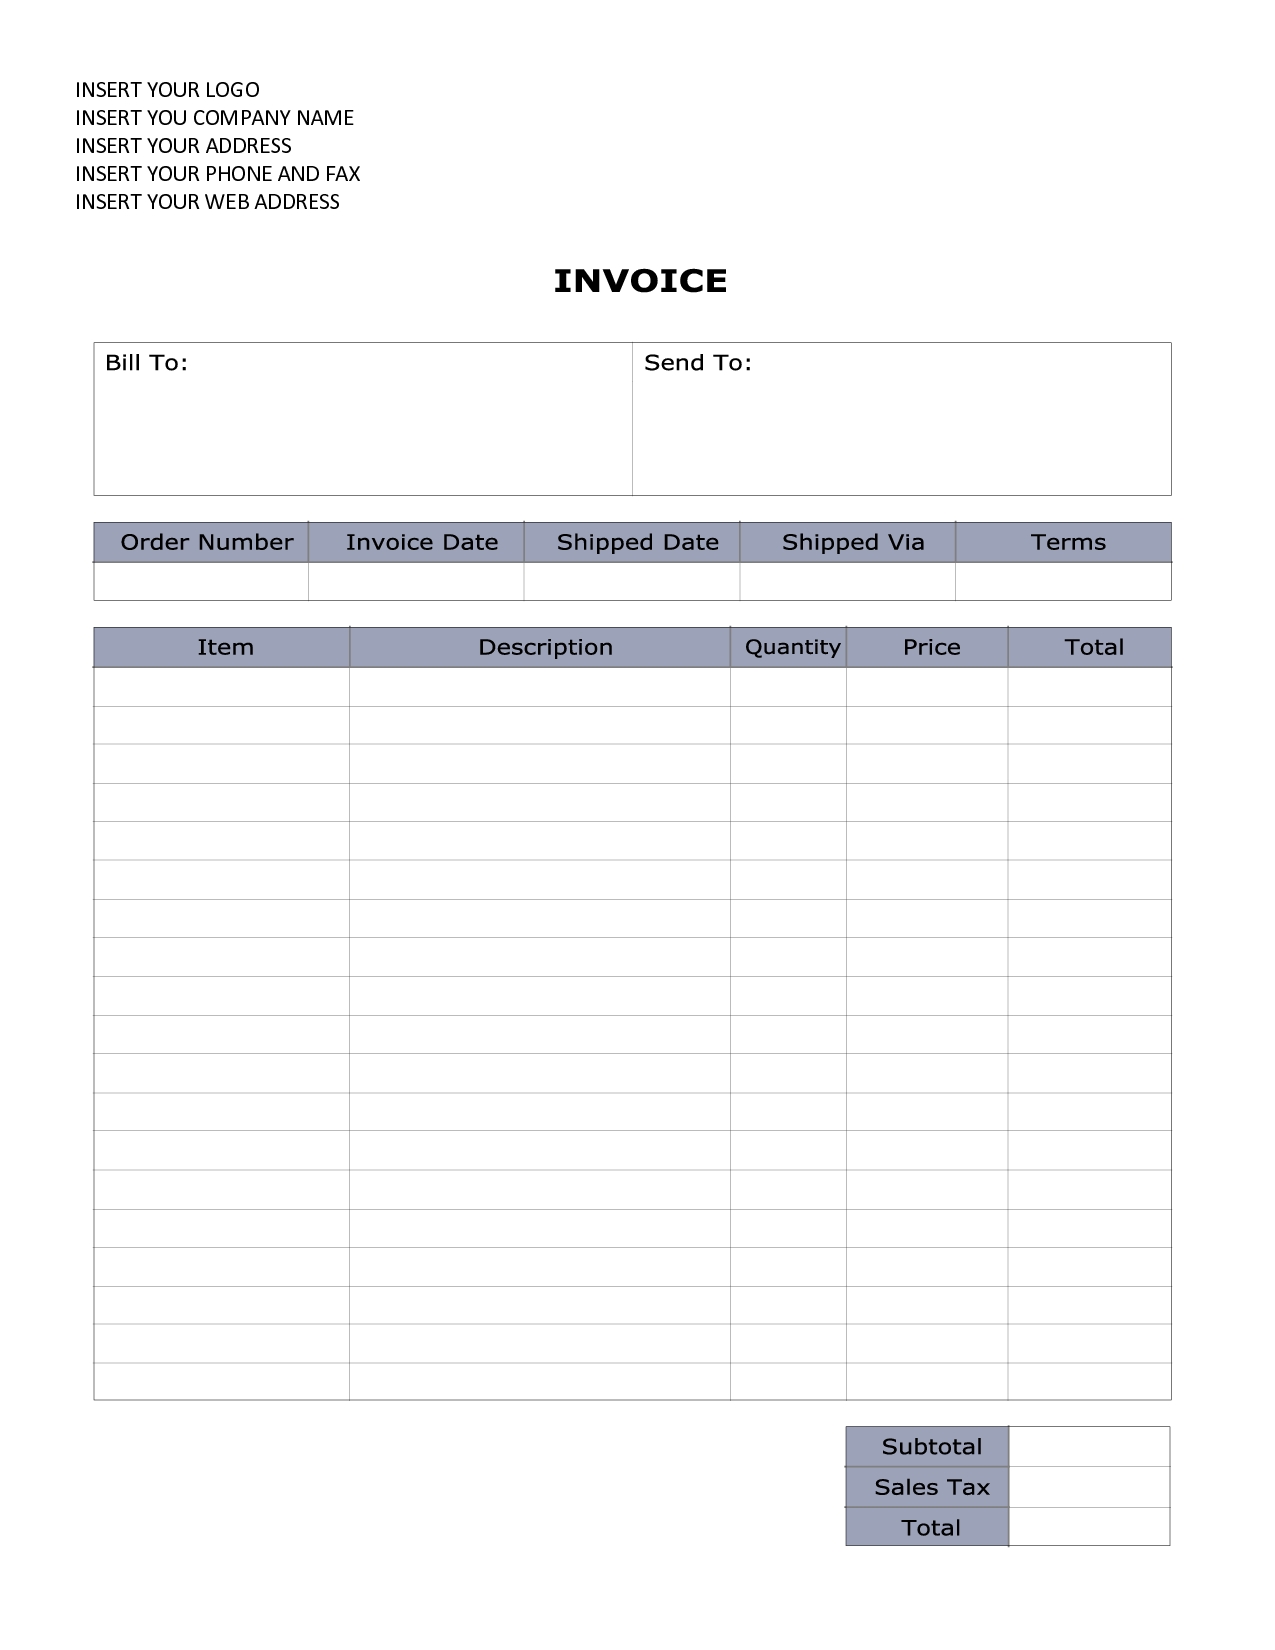 template for invoice word invoice template word invoice templates